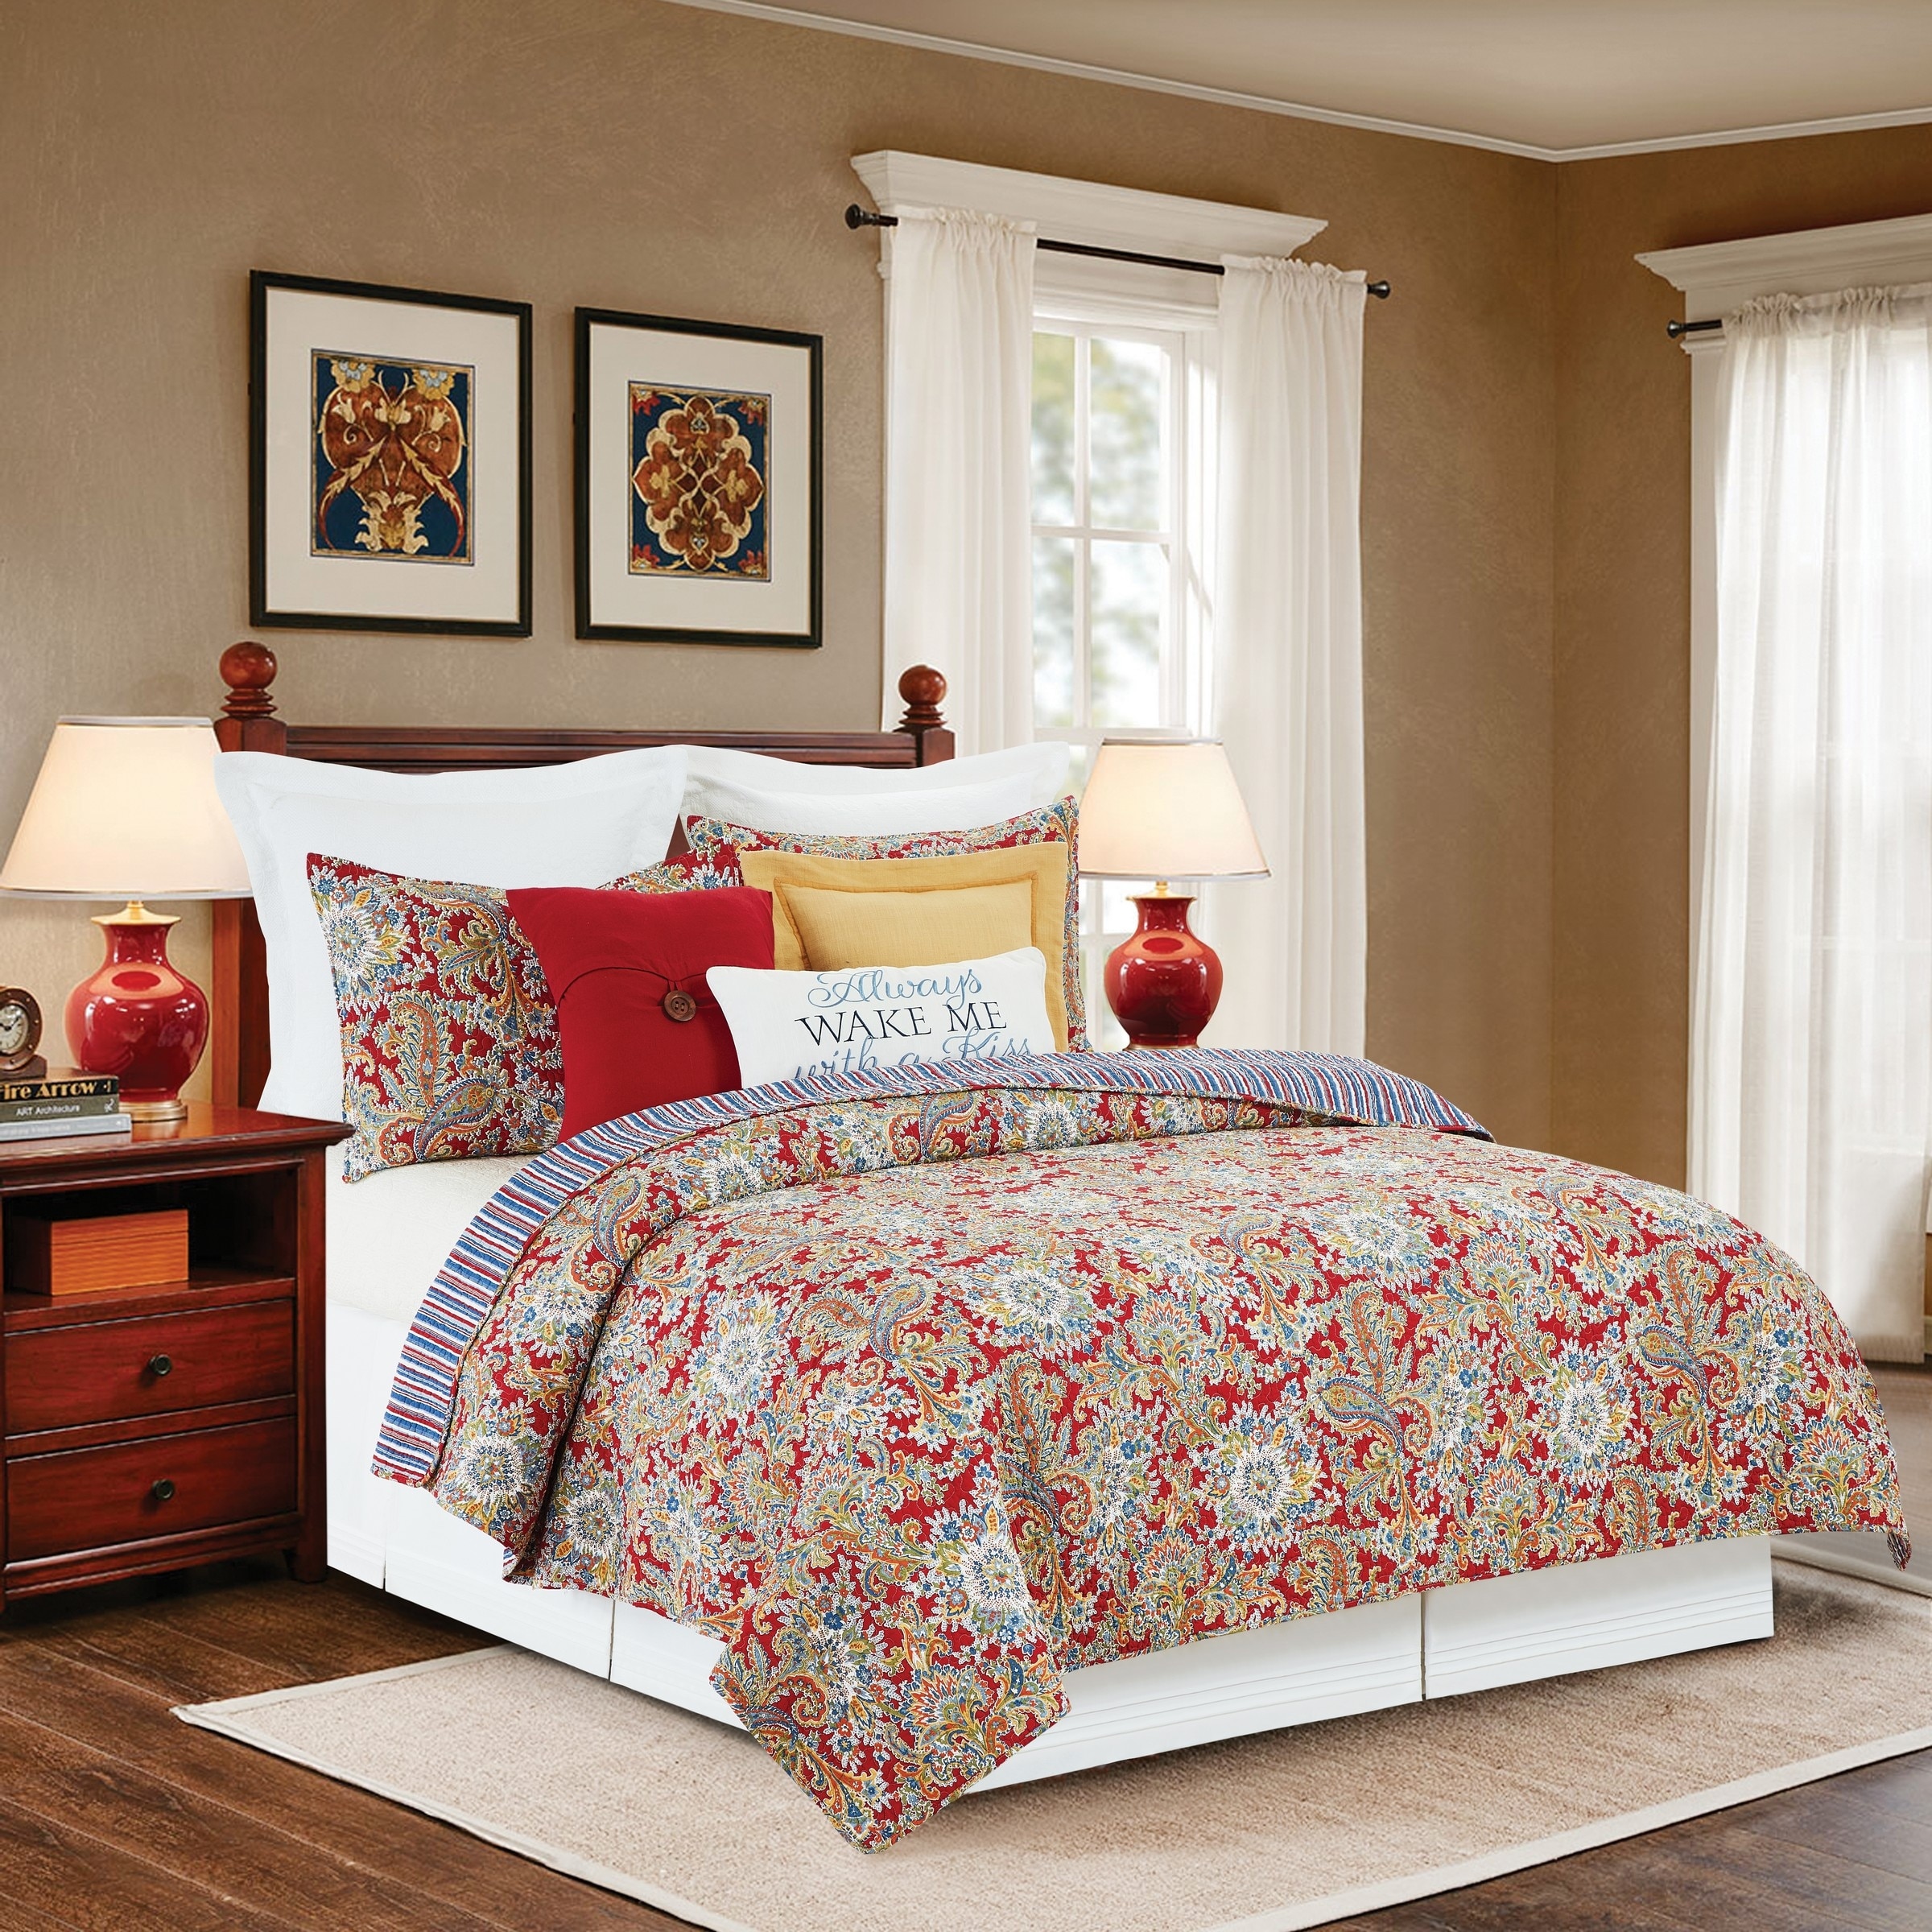 Fall Quilts and Bedspreads - Bed Bath & Beyond